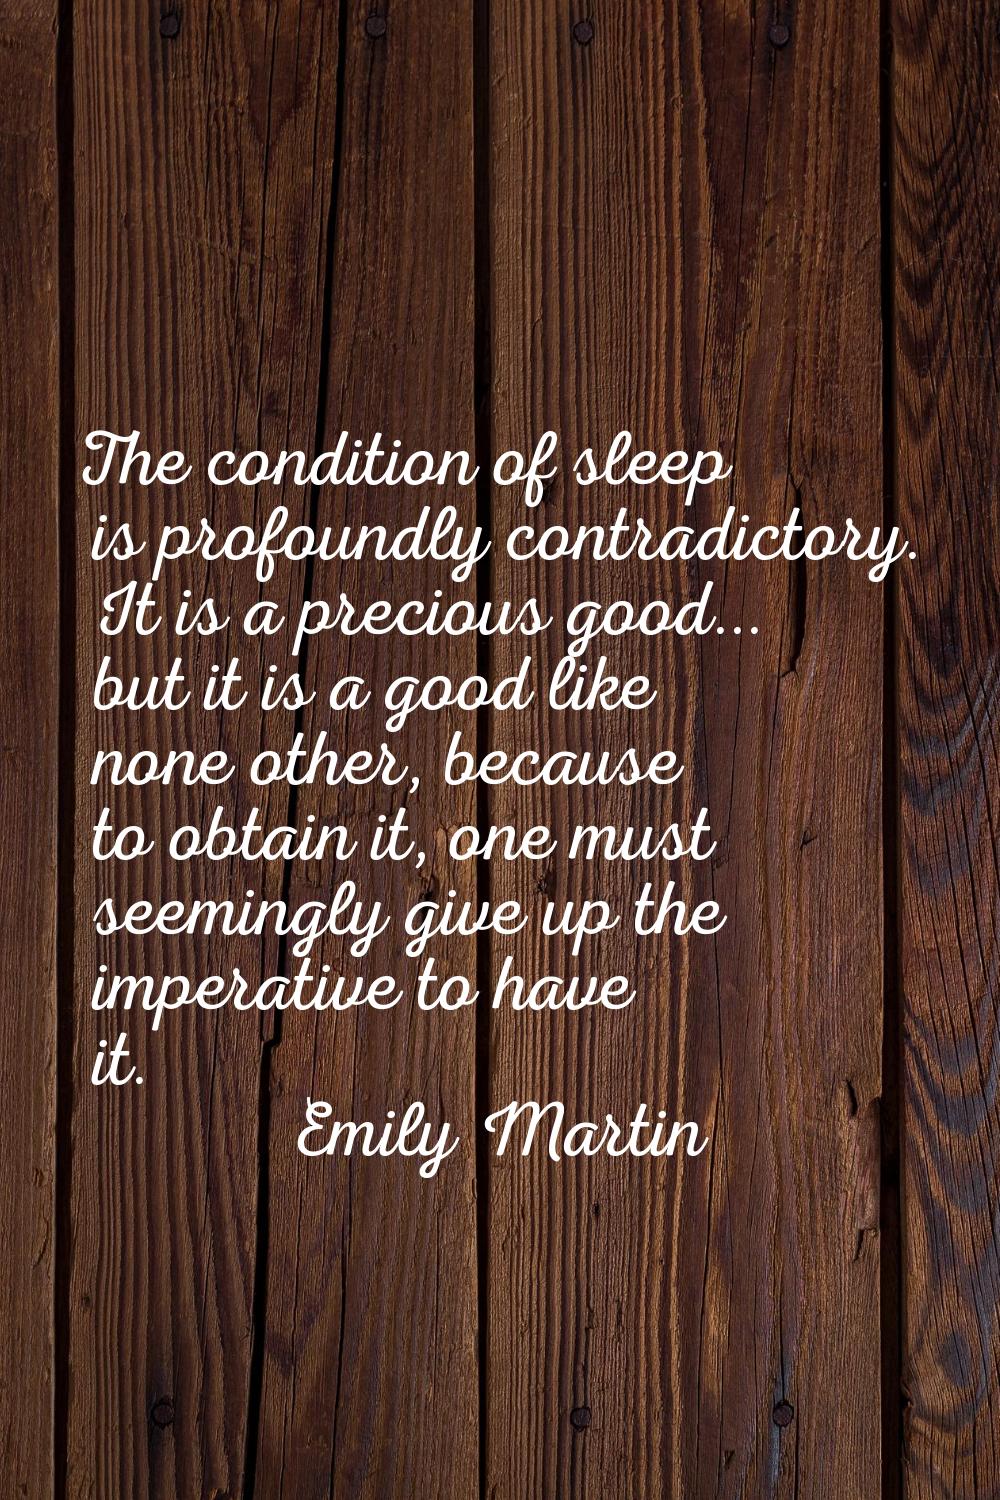 The condition of sleep is profoundly contradictory. It is a precious good... but it is a good like 